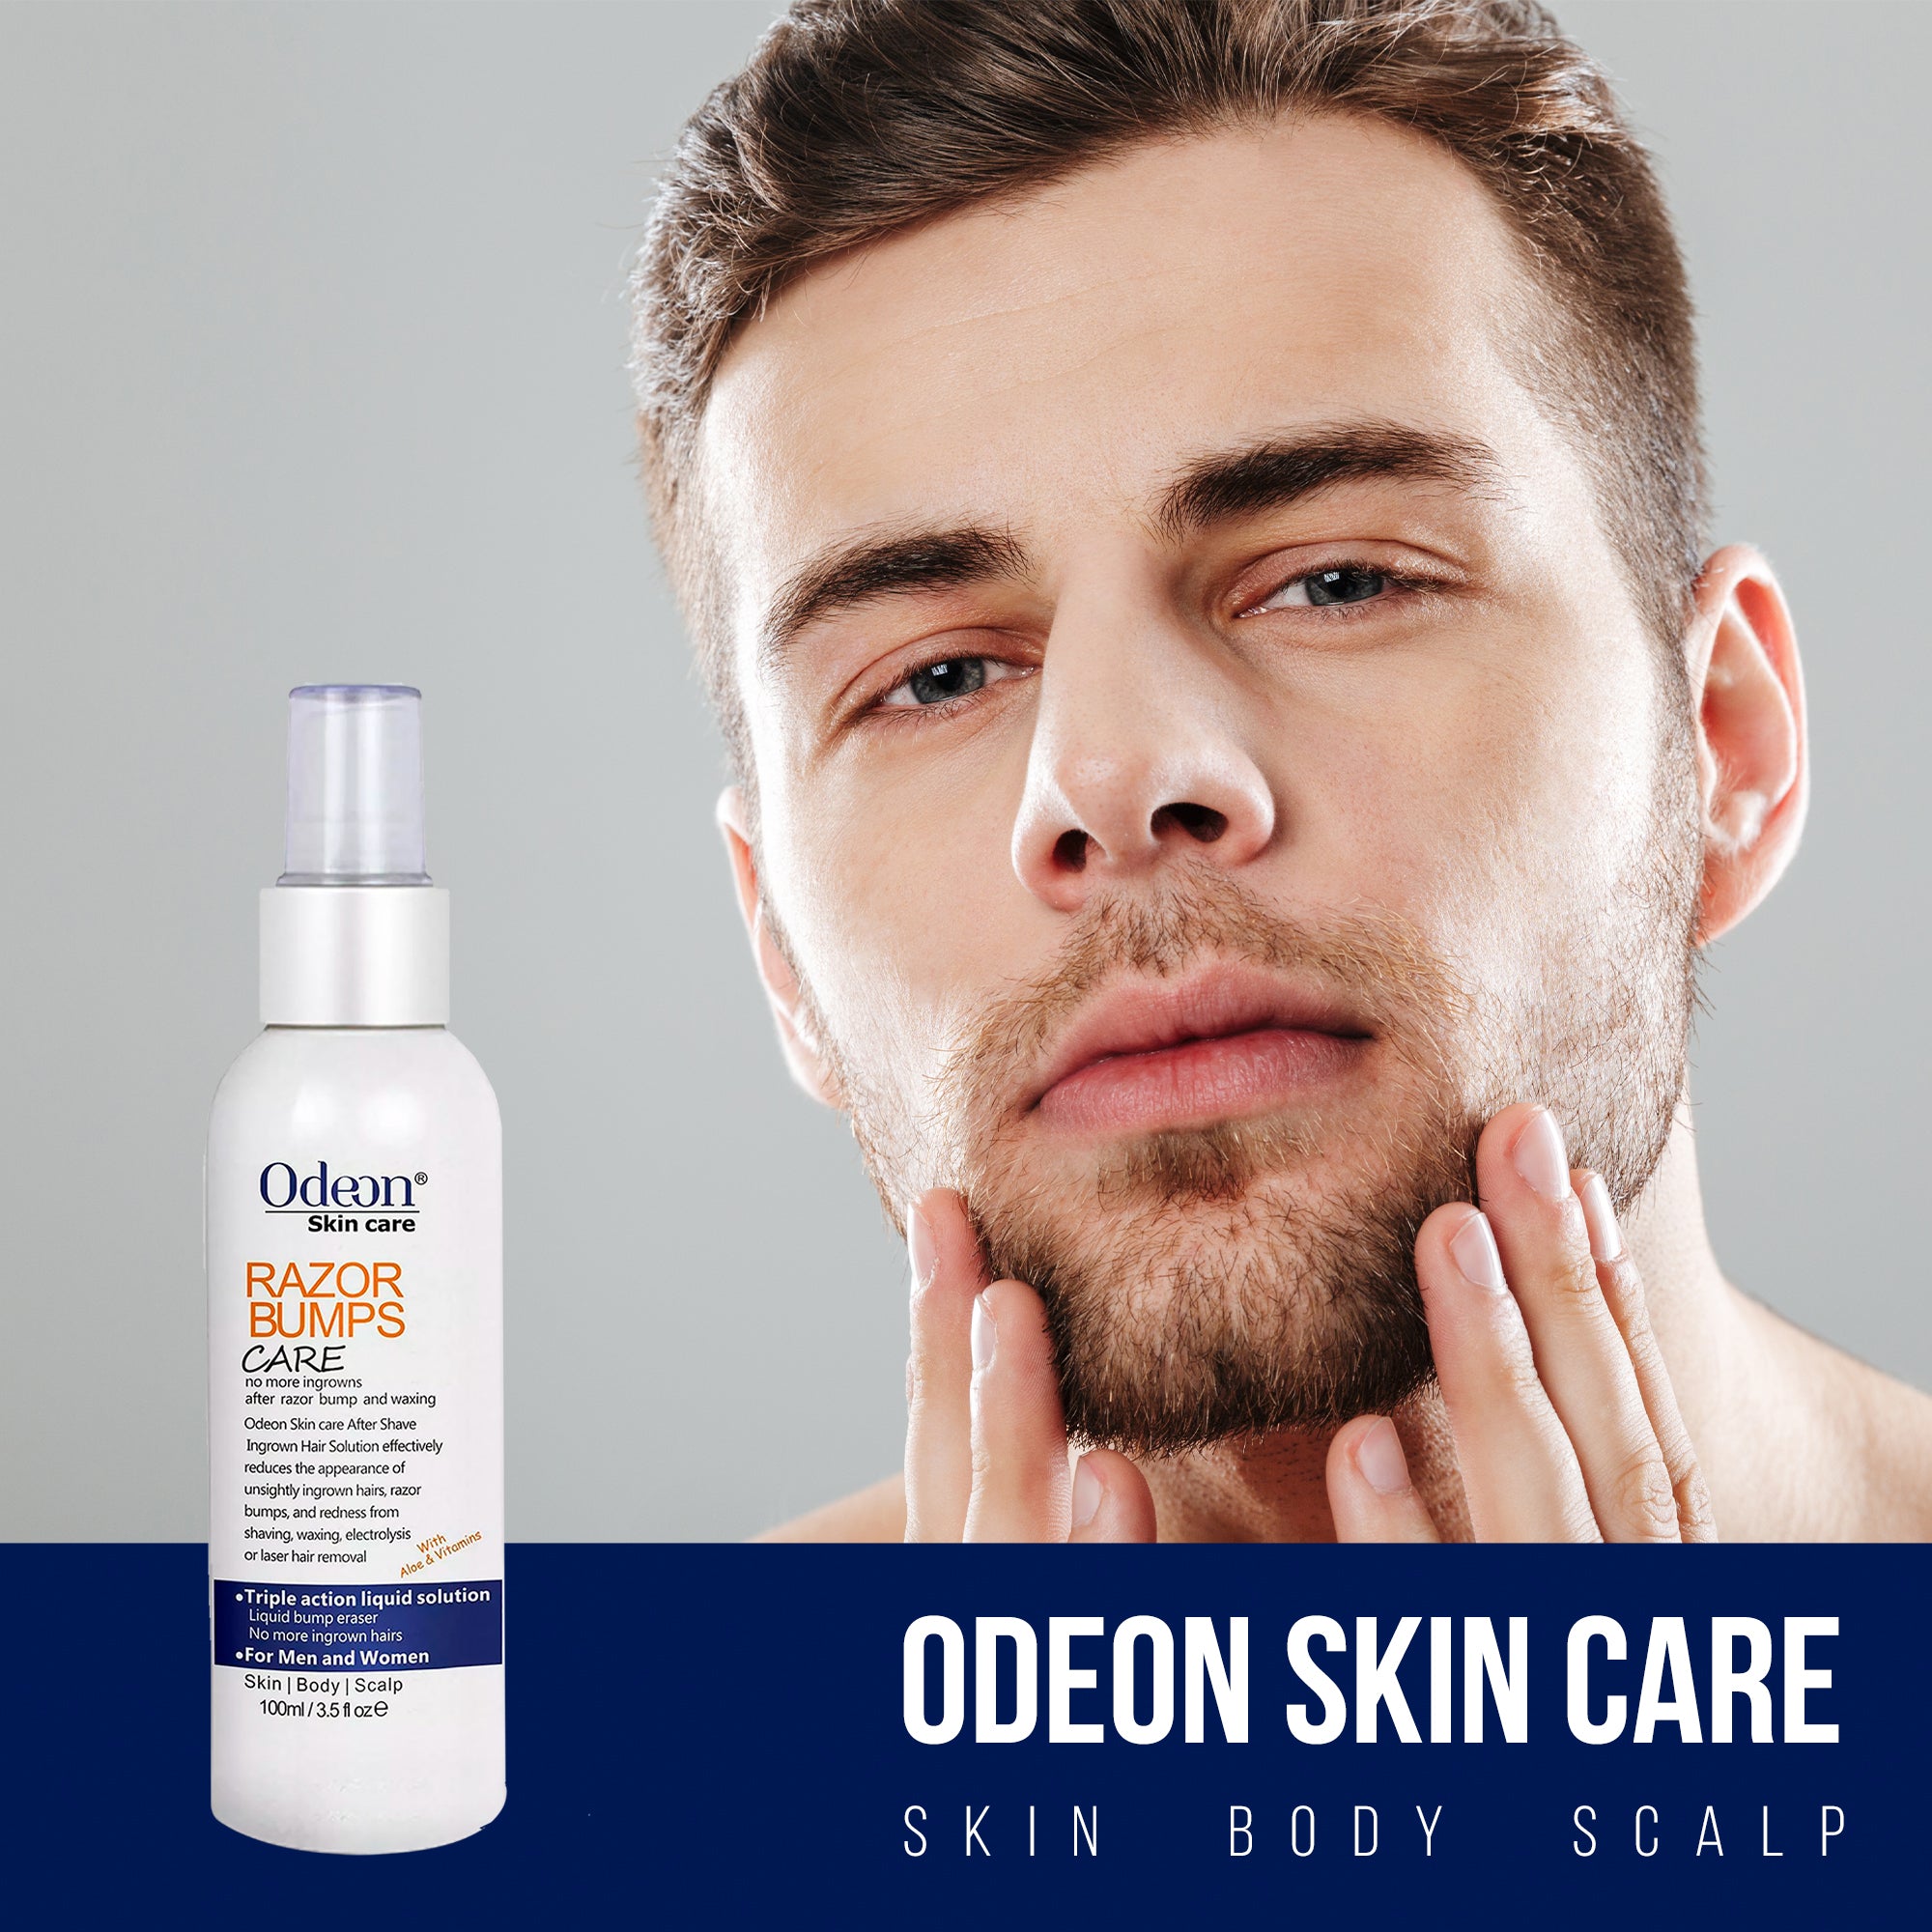 Odeon Skin Care Razor Bumps Treatment - Smooth, Soothing Relief for Irritation-Free Skin (3.5oz)